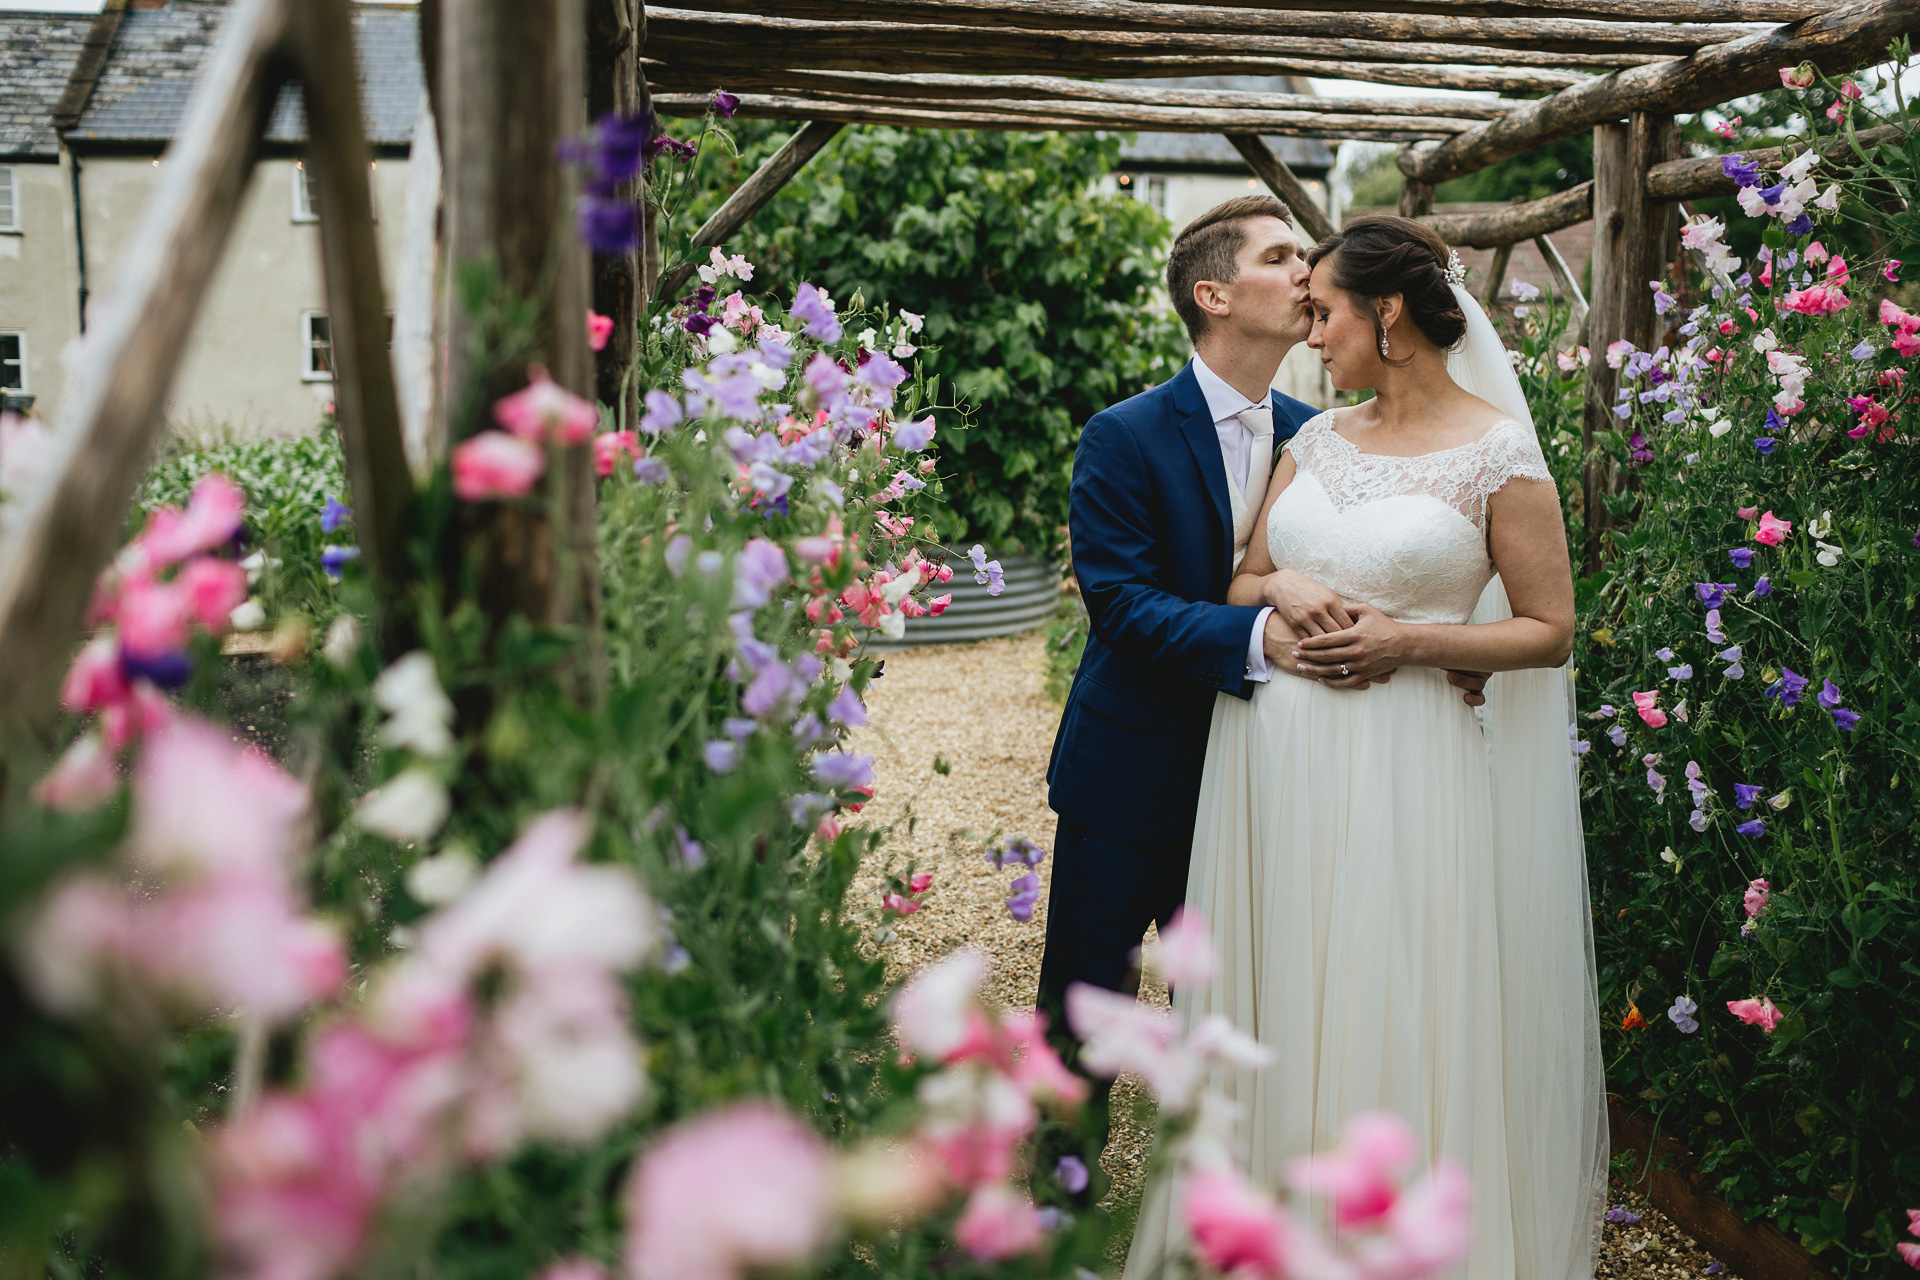 A bride and groom amongst sweet peas in a kitchen garden